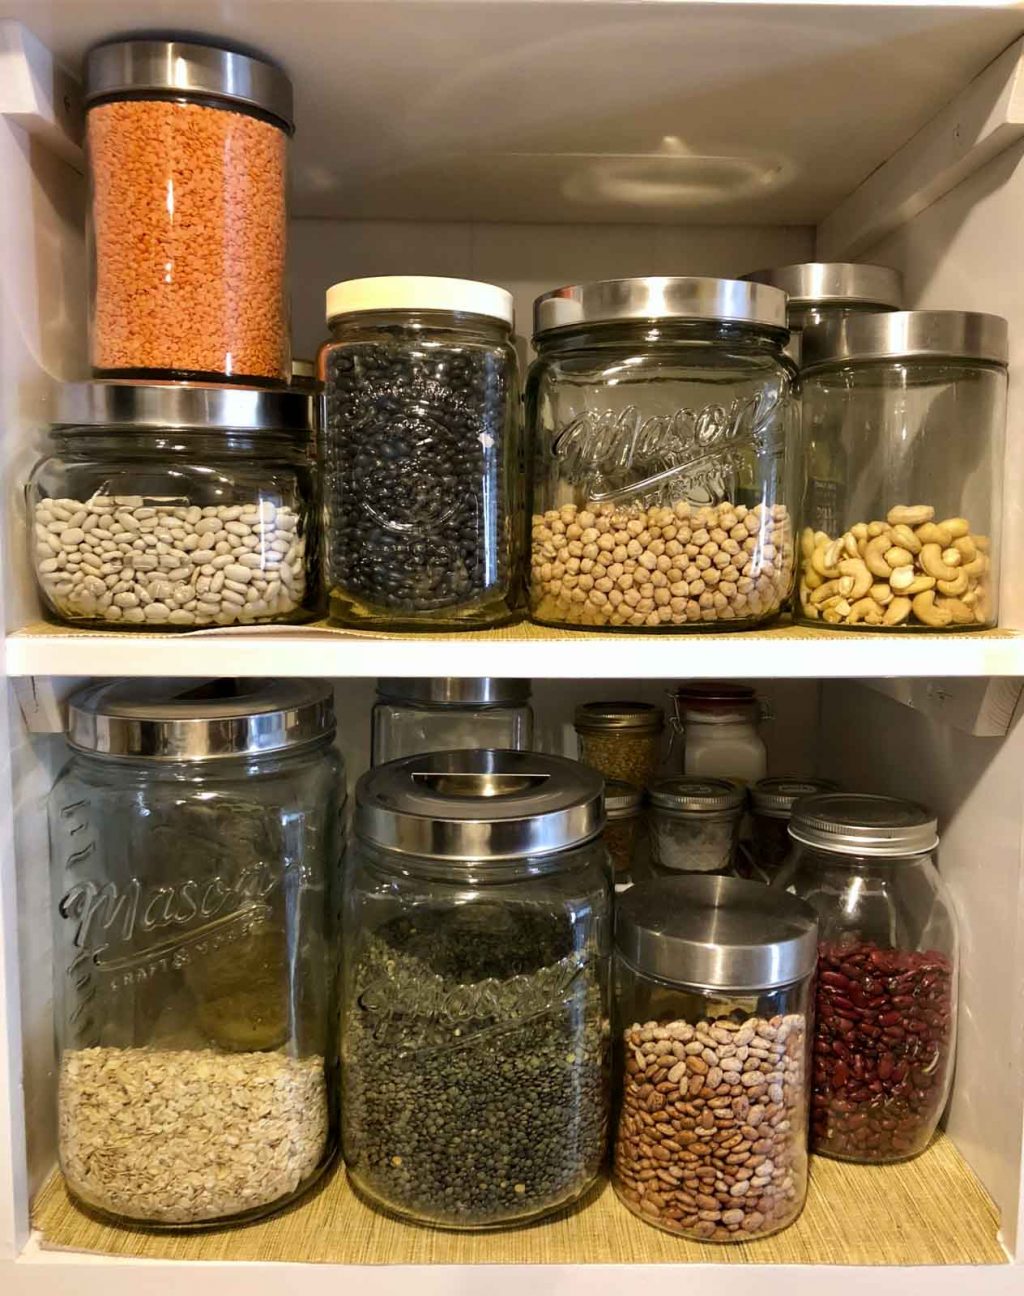 Two shelves of vegan products in glass jars (beans, lentils, oats) of a cheap vegan pantry.